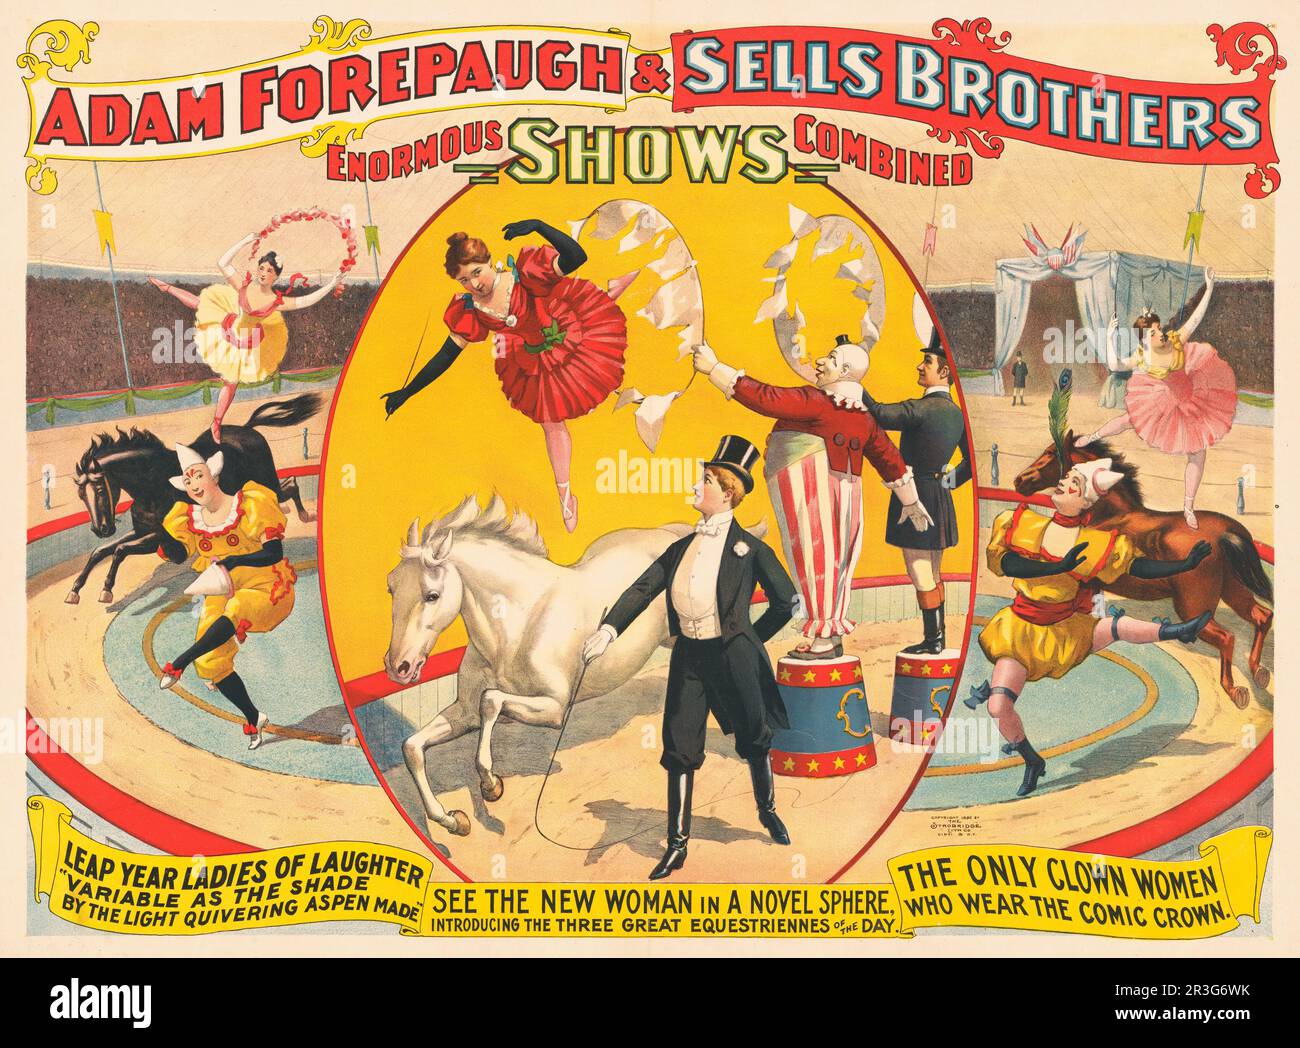 Vintage Adam Forepaugh & Sells Brothers circus poster showing women performers and clowns, circa 1896. Stock Photo